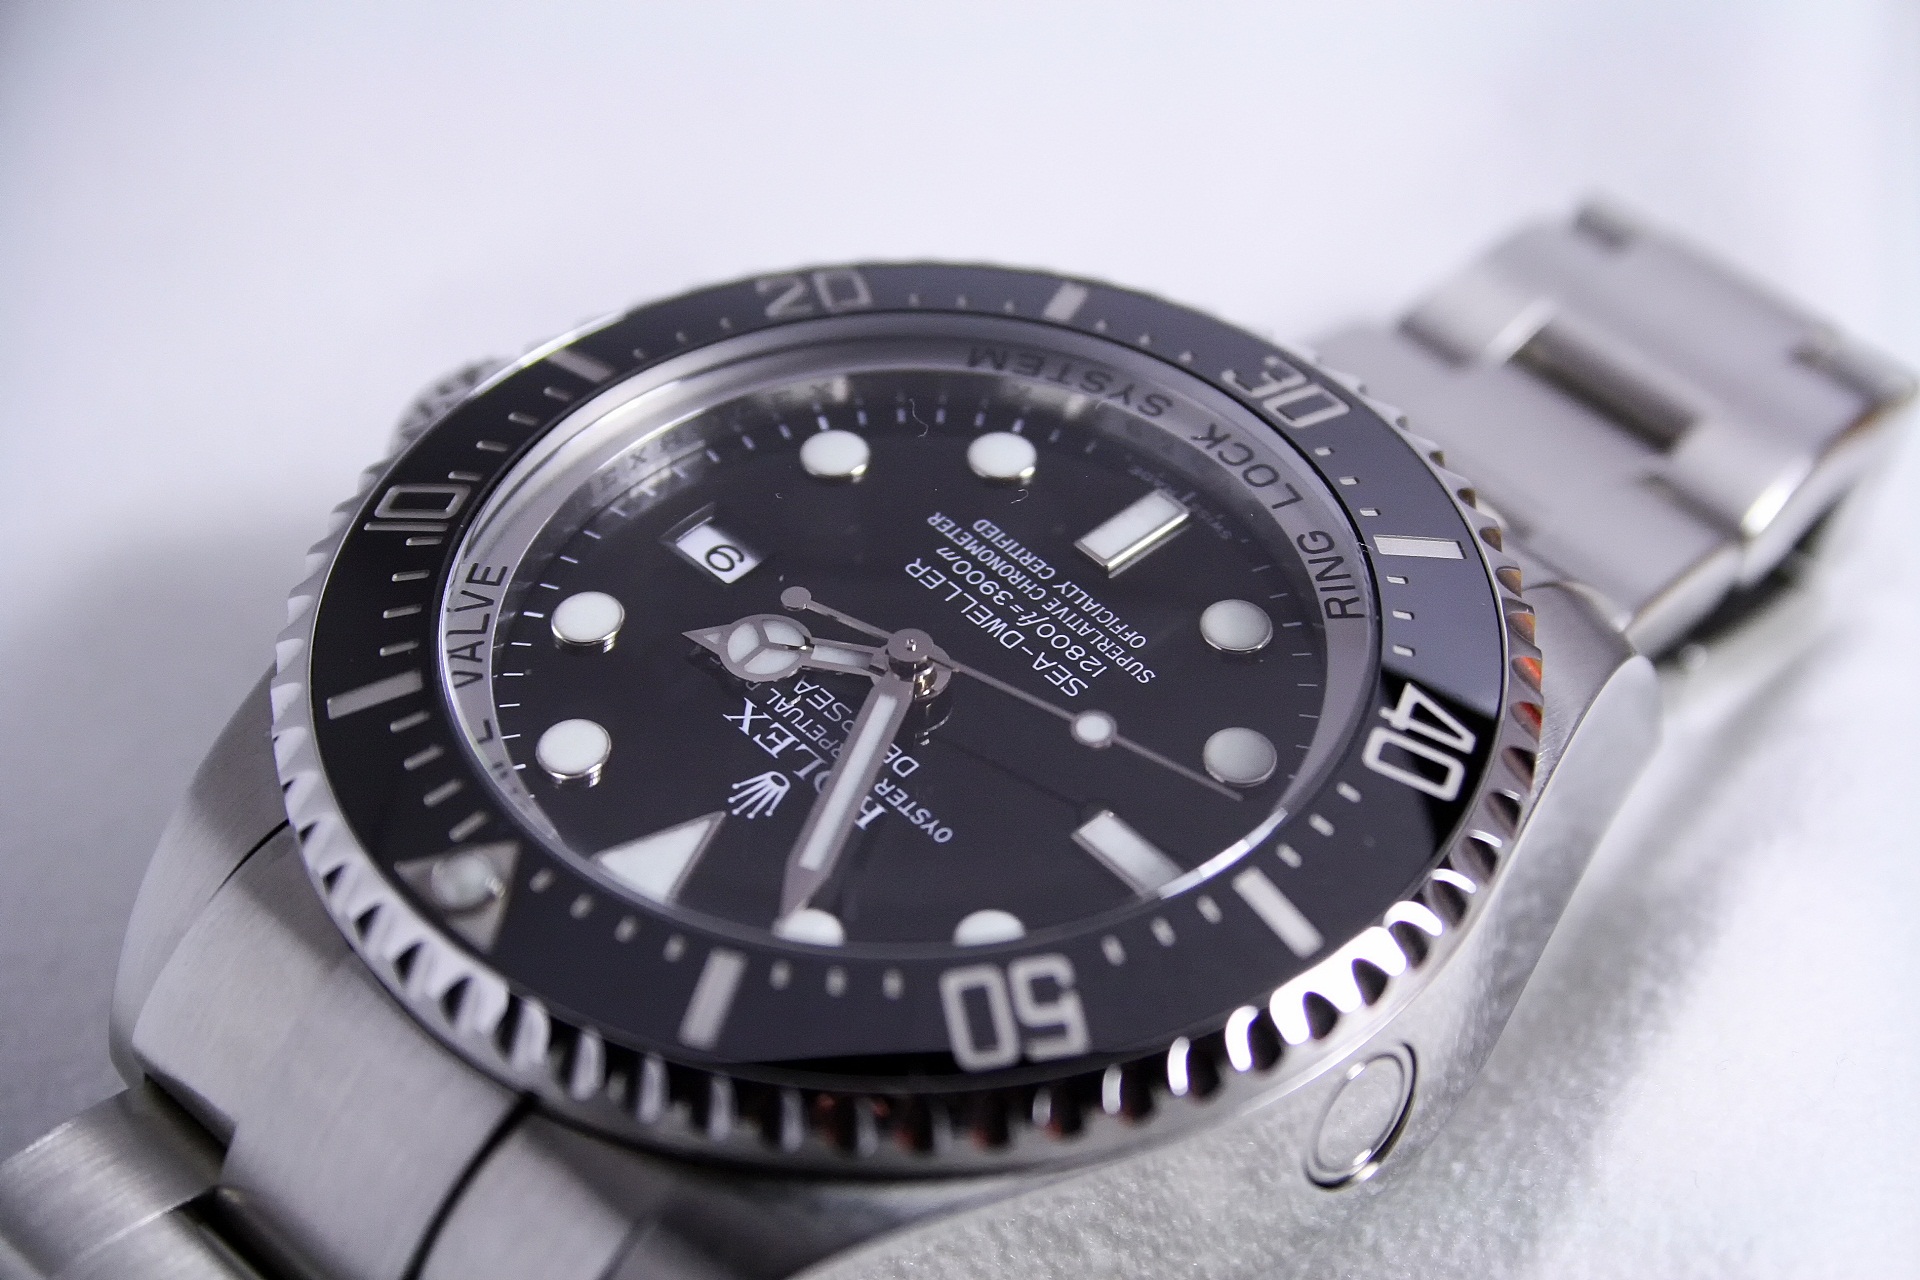 Expert Tips And Guidance To Make Money Selling Watches Online